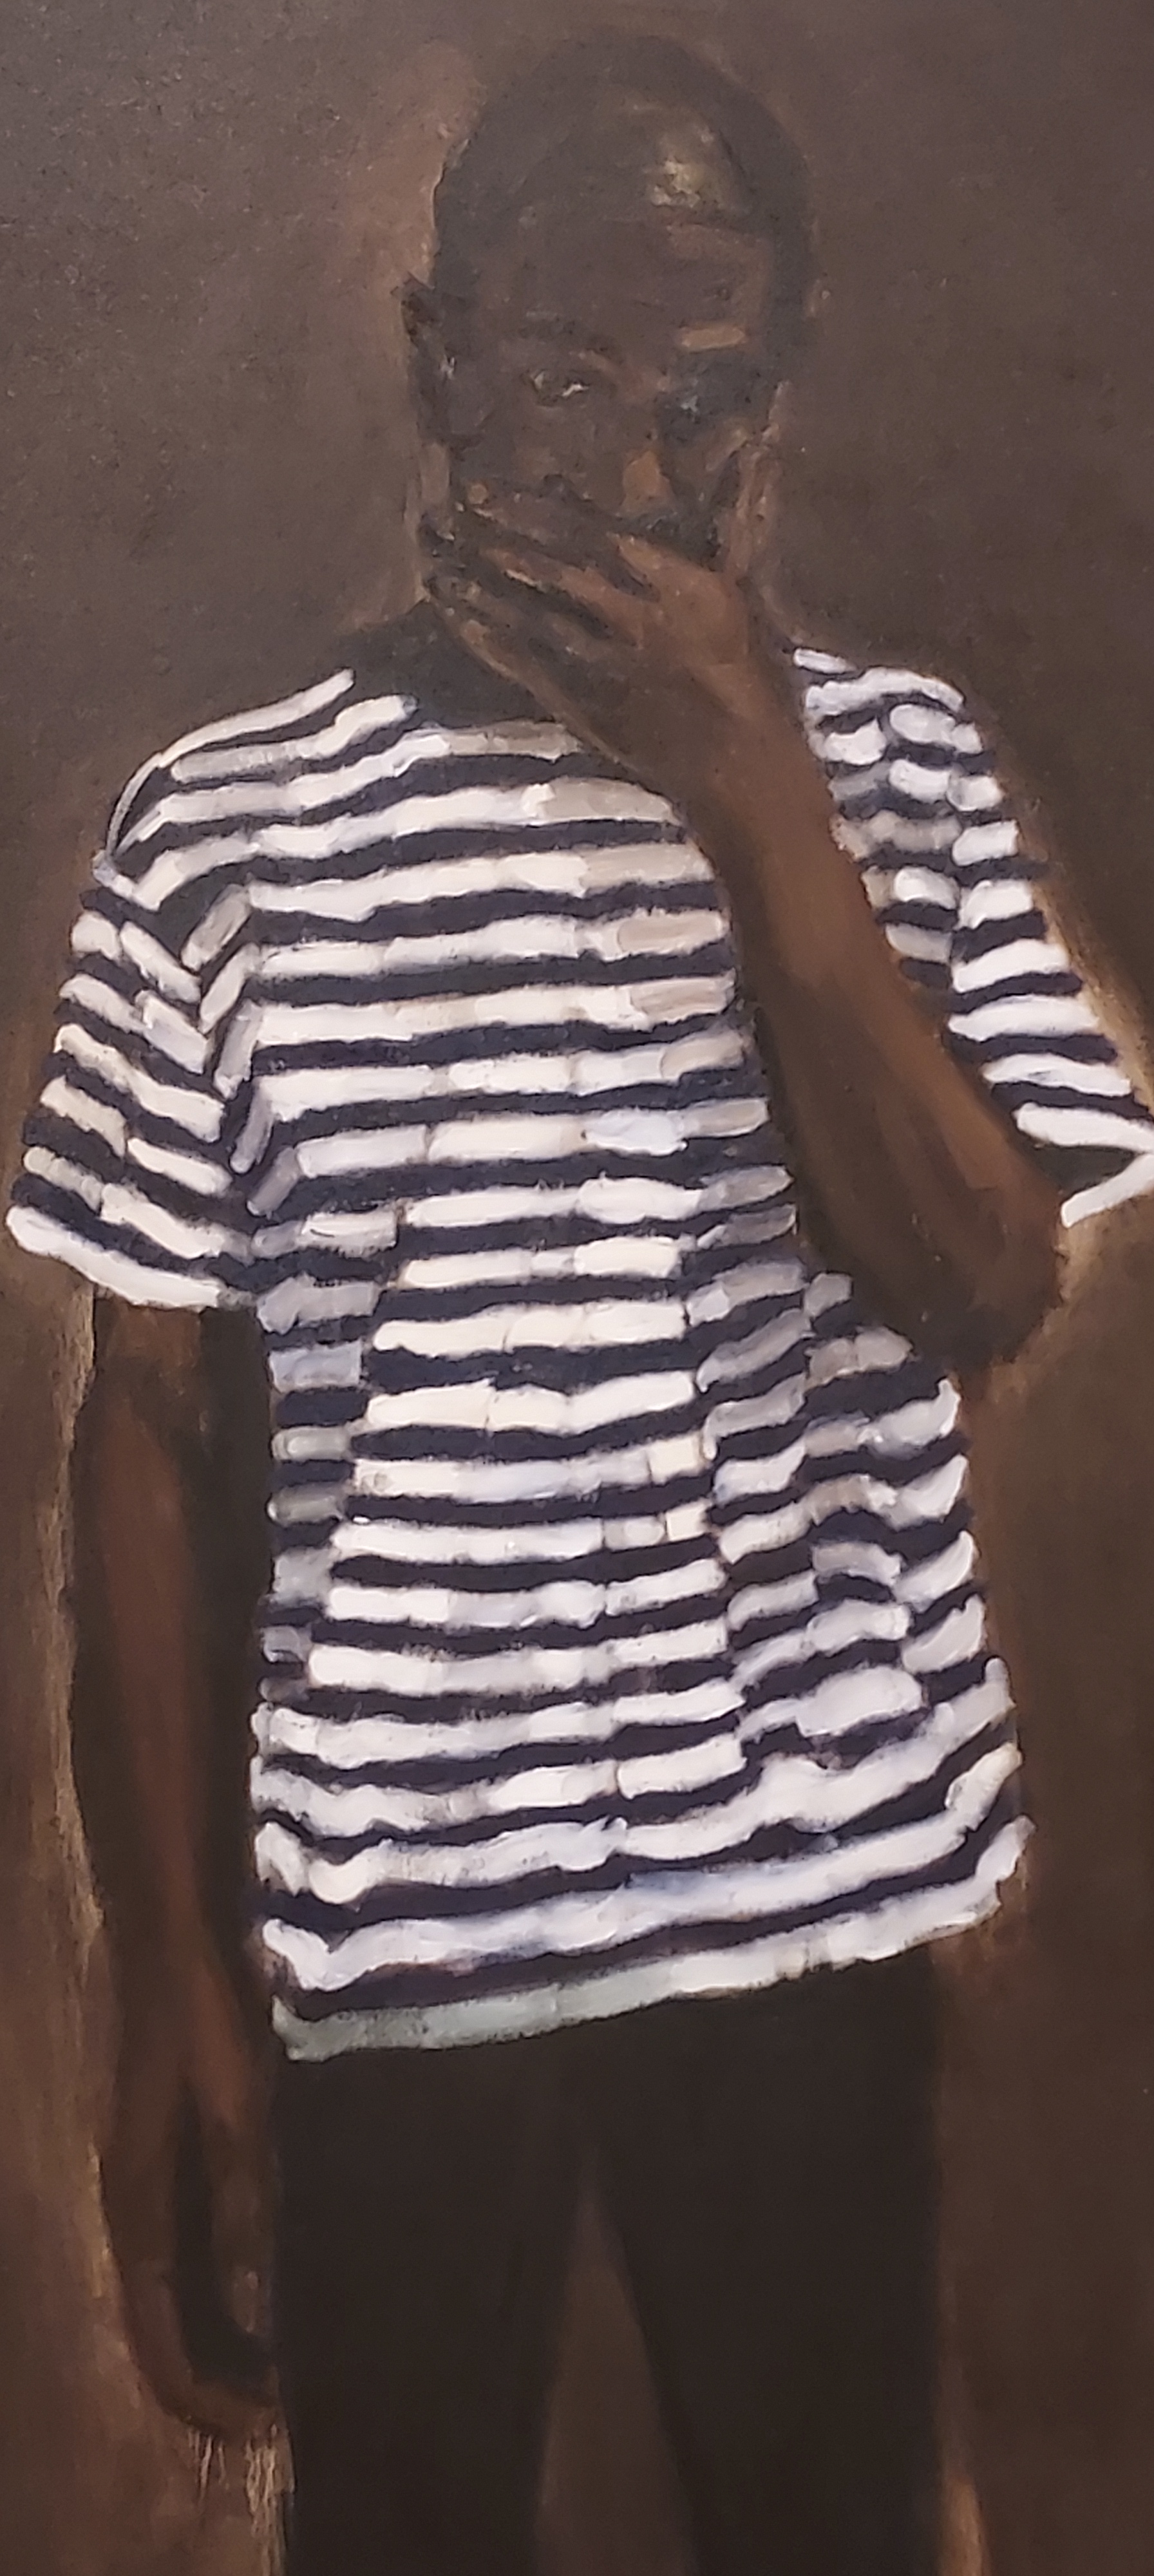 Oil painting of a young man with African heritage, dressed in a black and white striped t-shirt, standing with his left hand covering his mouth.